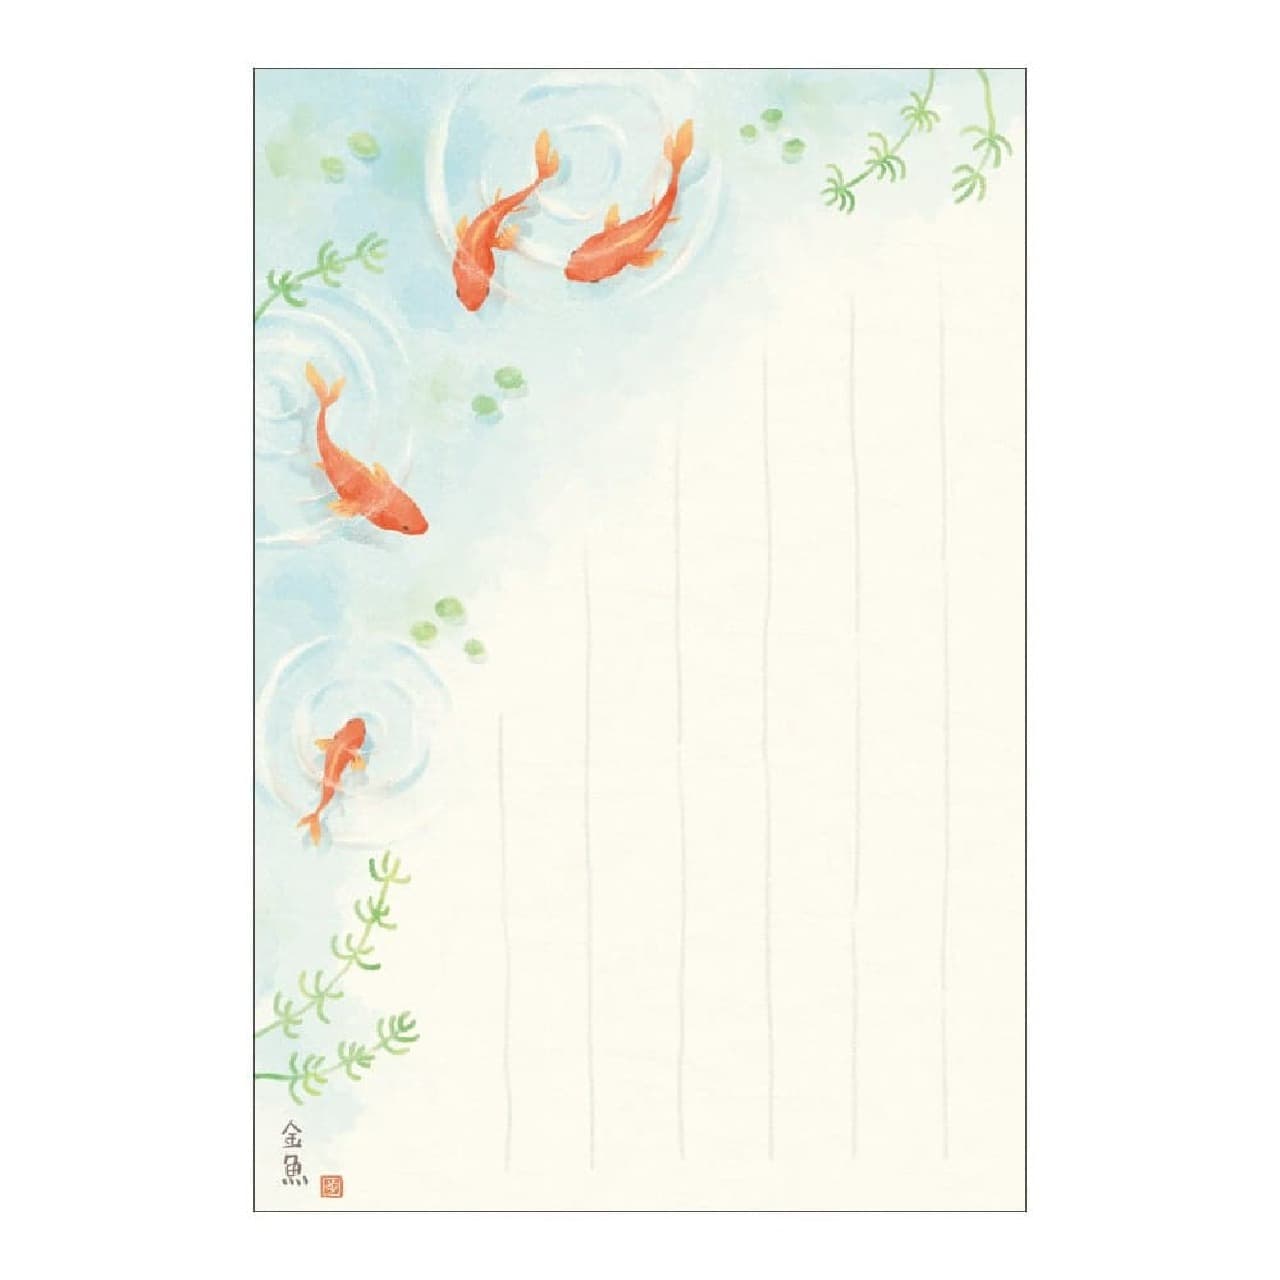 The long-awaited "Pictured Postcard 2024 Summer Pattern" sent by the Post Office Product Service will go on sale on May 7! The design evokes the charm of summer.